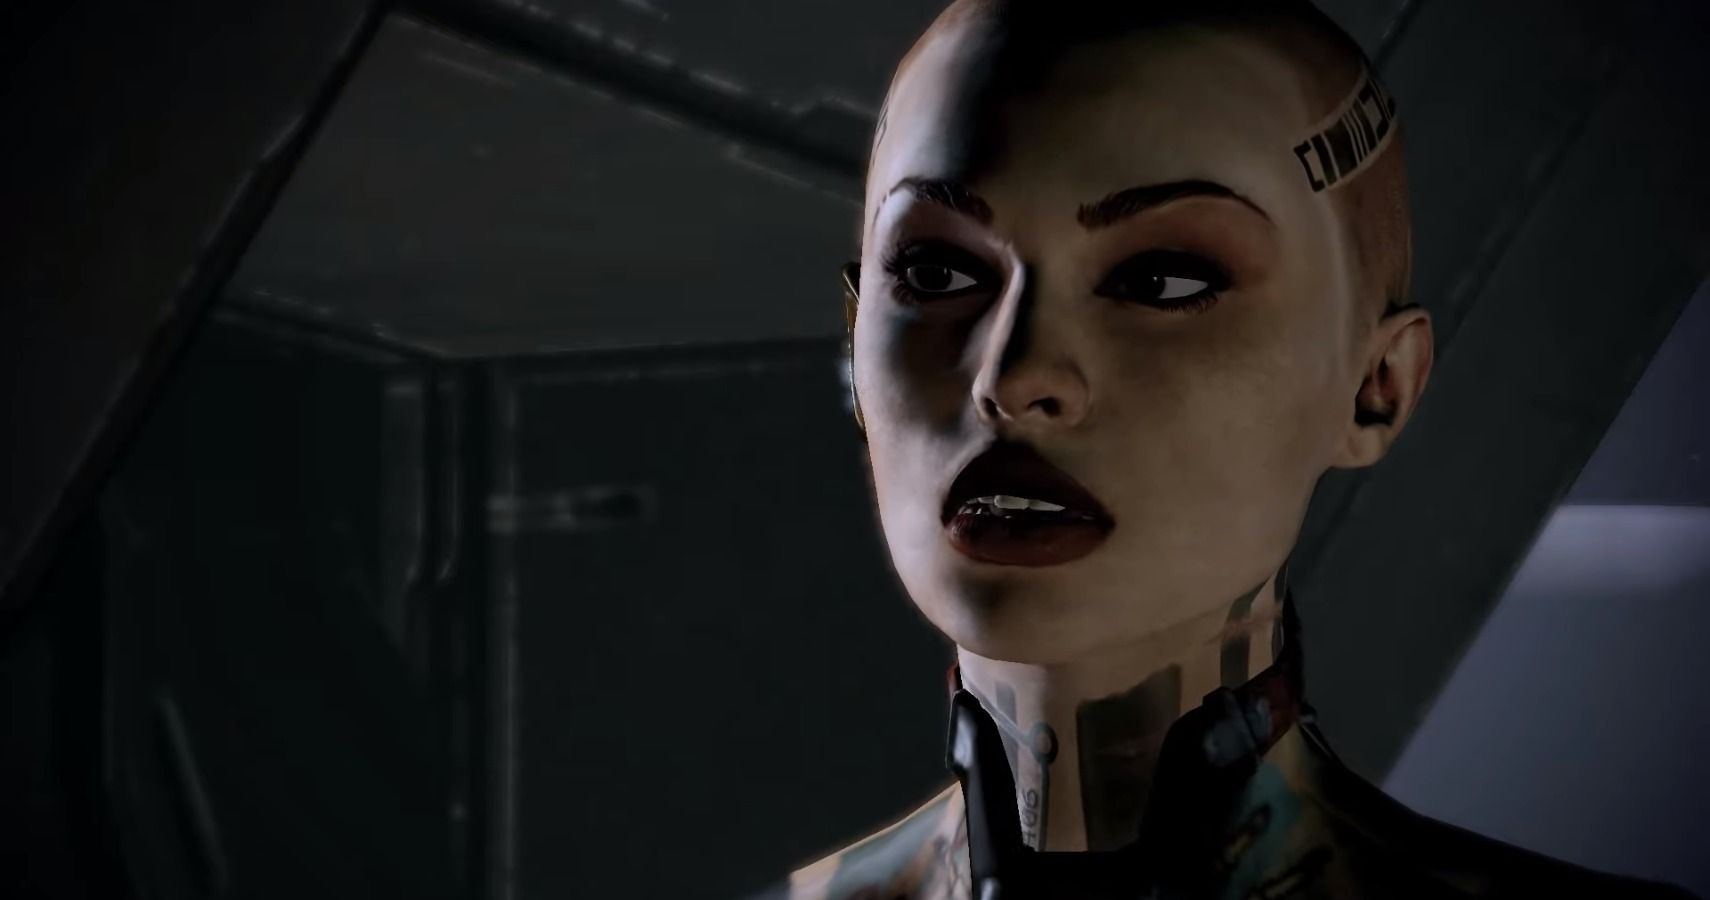 Mass Effect 2’s Jack was originally pansexual, but non-straight romance was cut due to Fox News